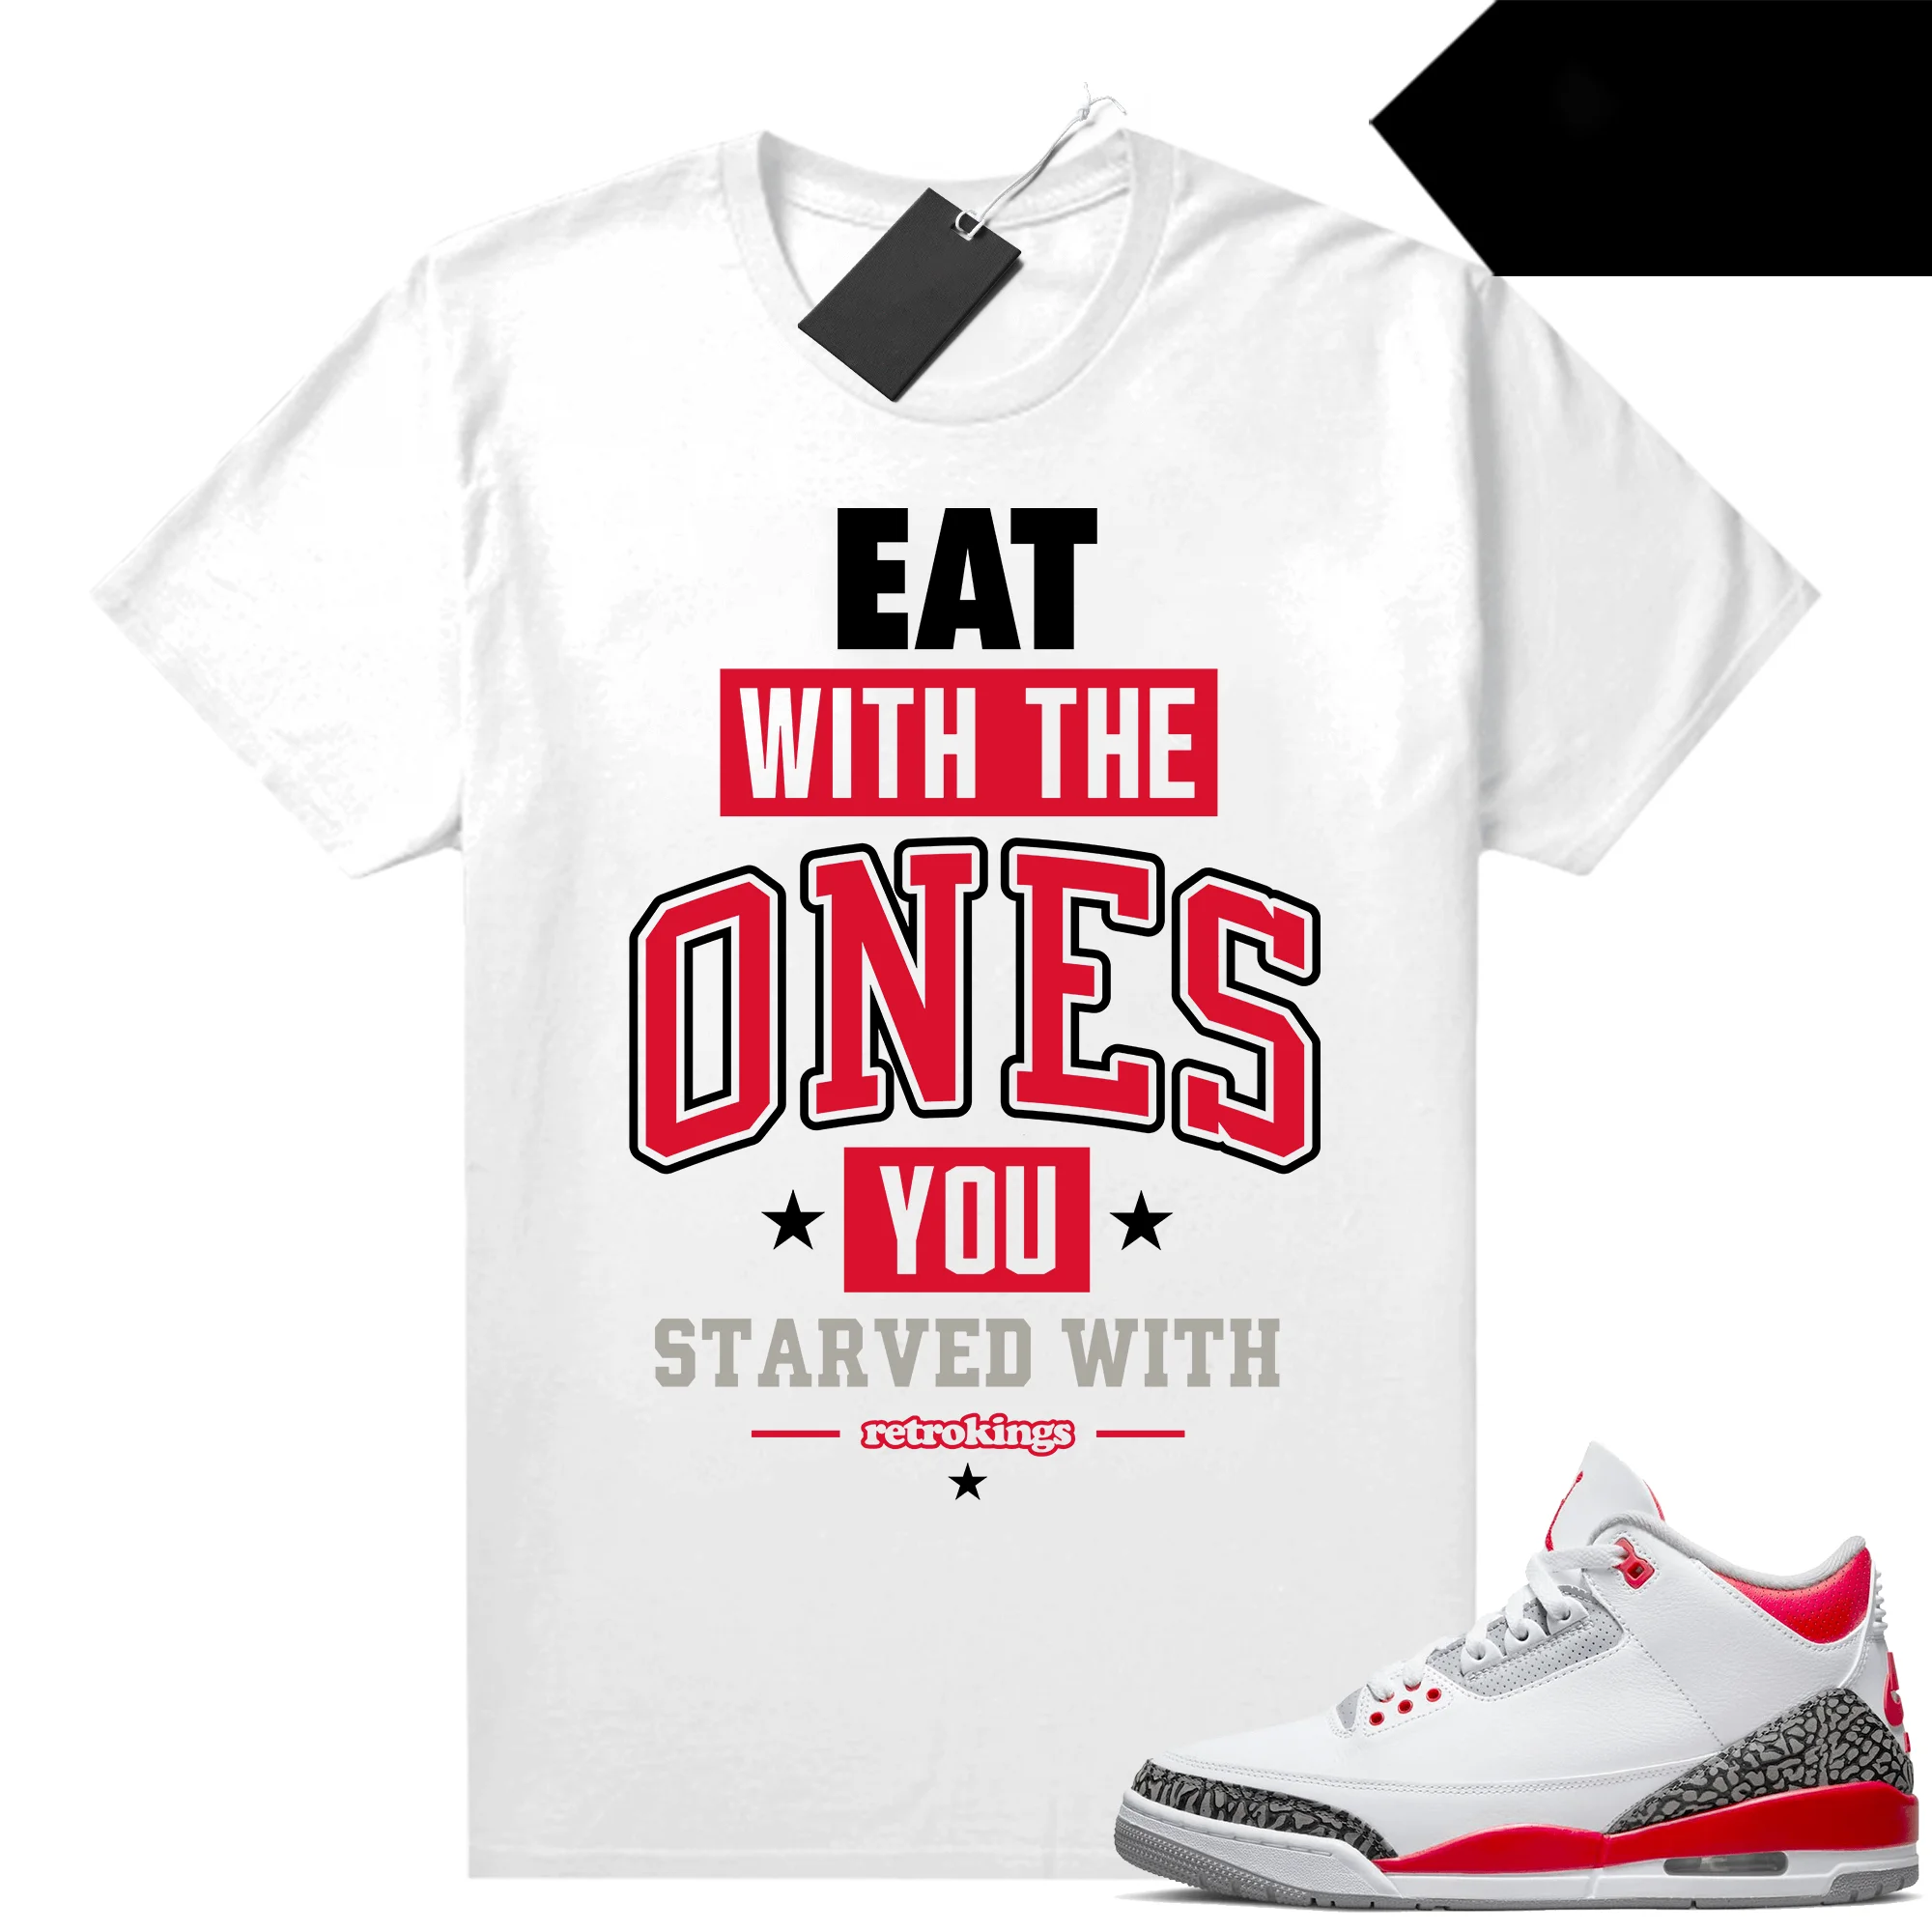 

Fire Red 3s Shirts Sneaker Match White Eat With The Ones Sneaker Clothing 100% Cotton Unisex Graphic T Shirts For Men